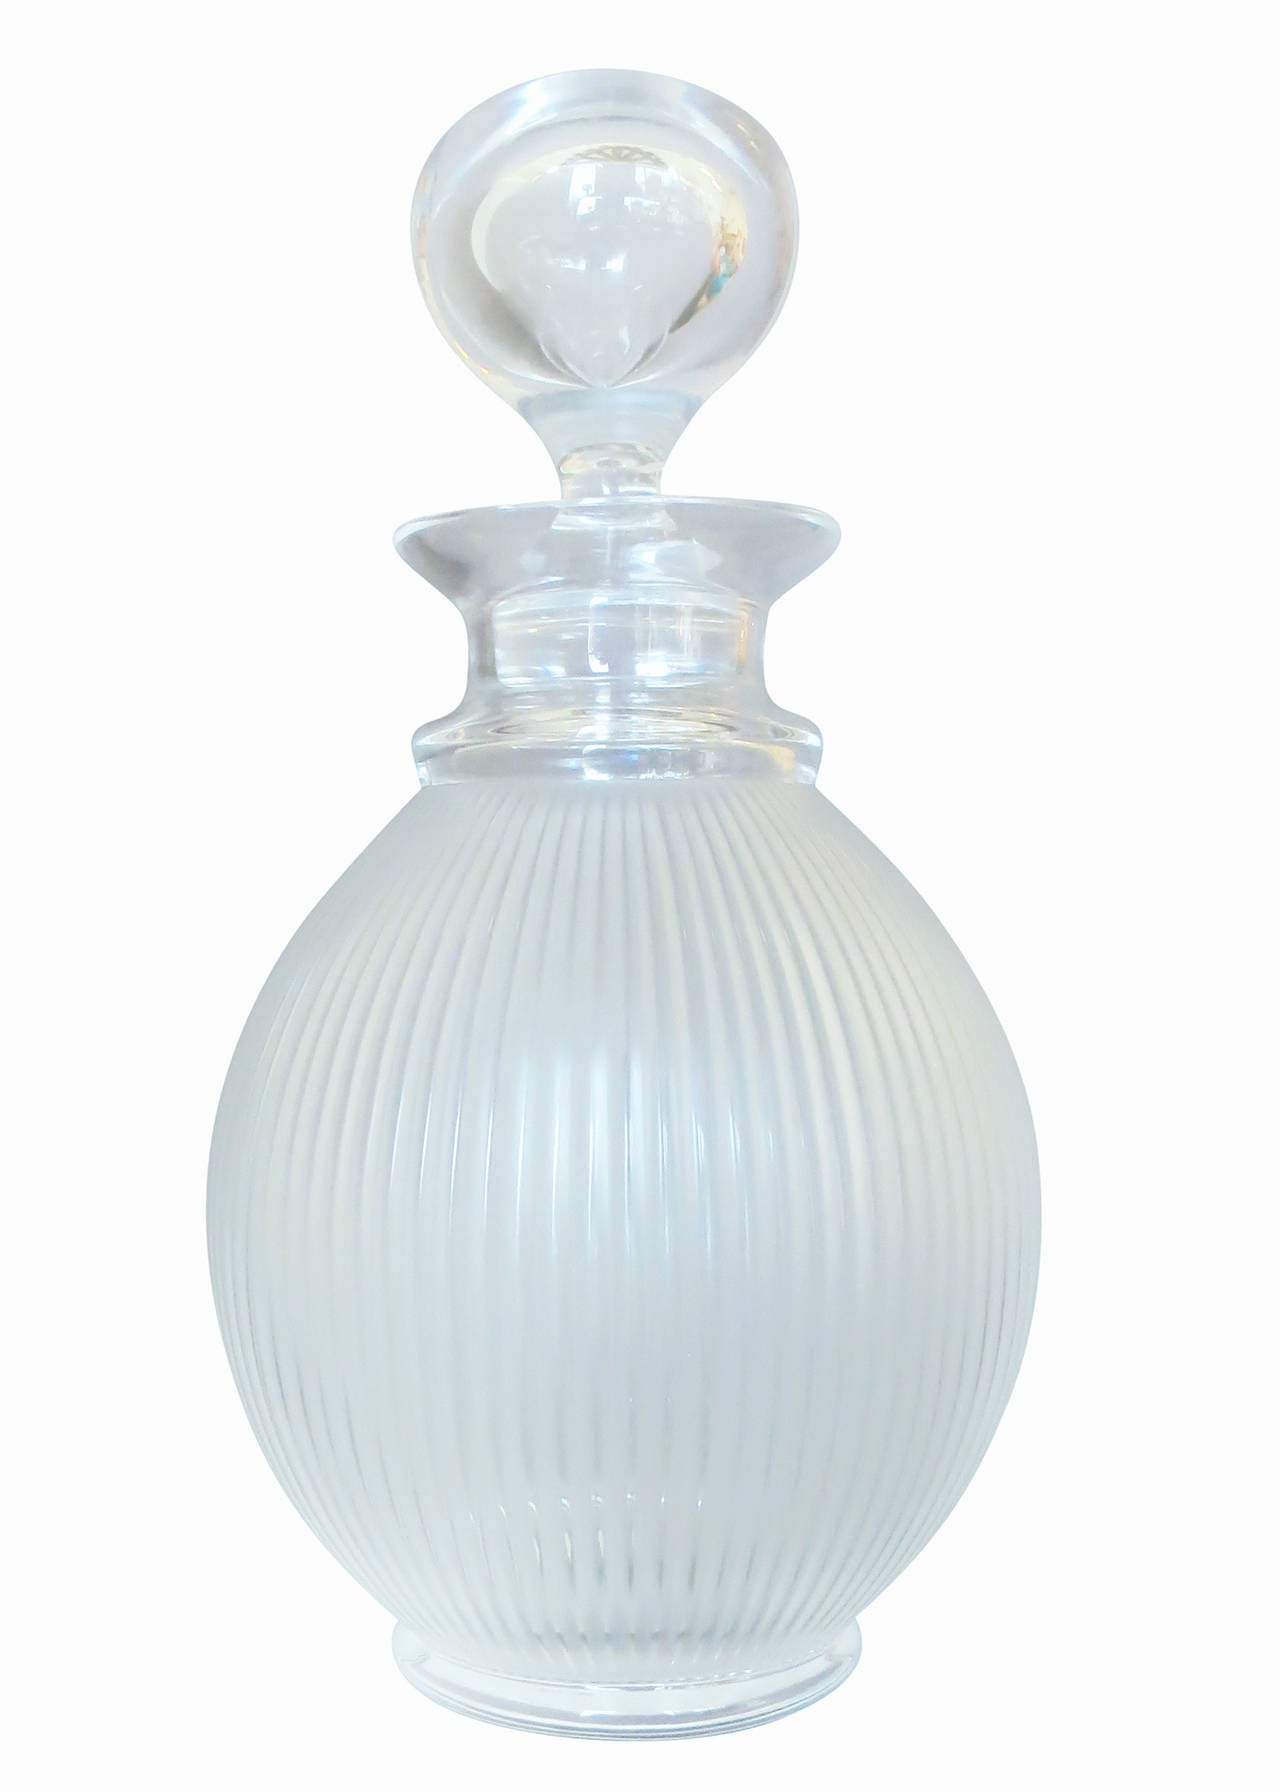 Designed and crafted in 1976 by René’s son Marc Lalique, this pattern has become iconic. Referencing both fluted antique columns and modernist architecture, it takes seven glass masters to create this decanter using the time-honored techniques of